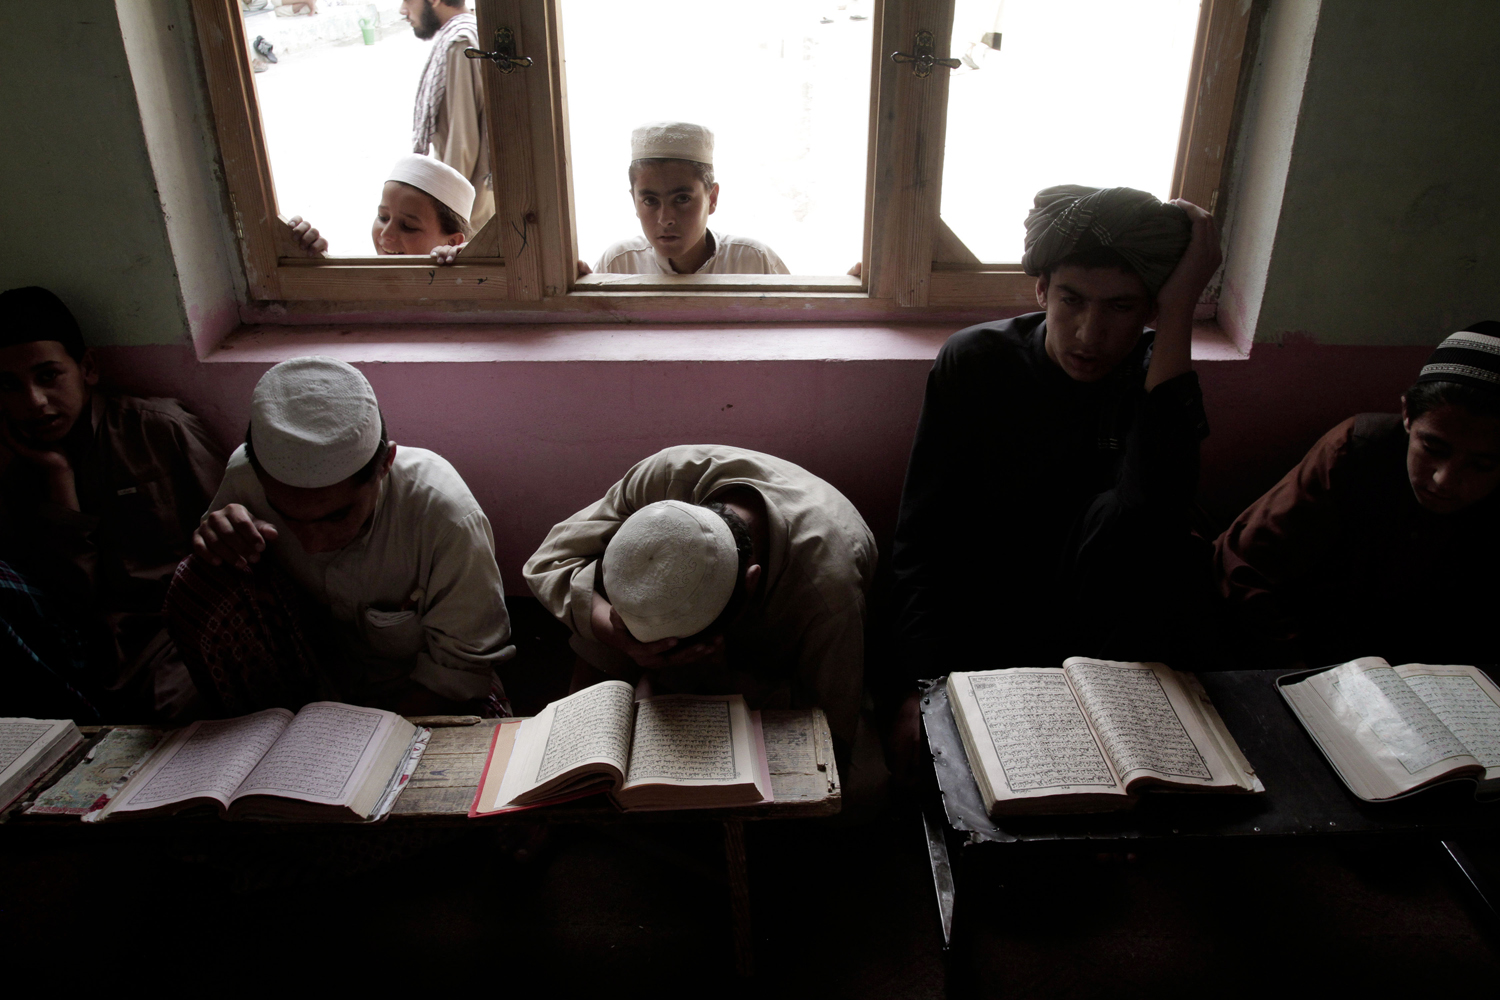 July 16, 2013. Afghan boys read the Quran during the Muslim holy month of Ramadan at a mosque on the outskirts of Kabul.